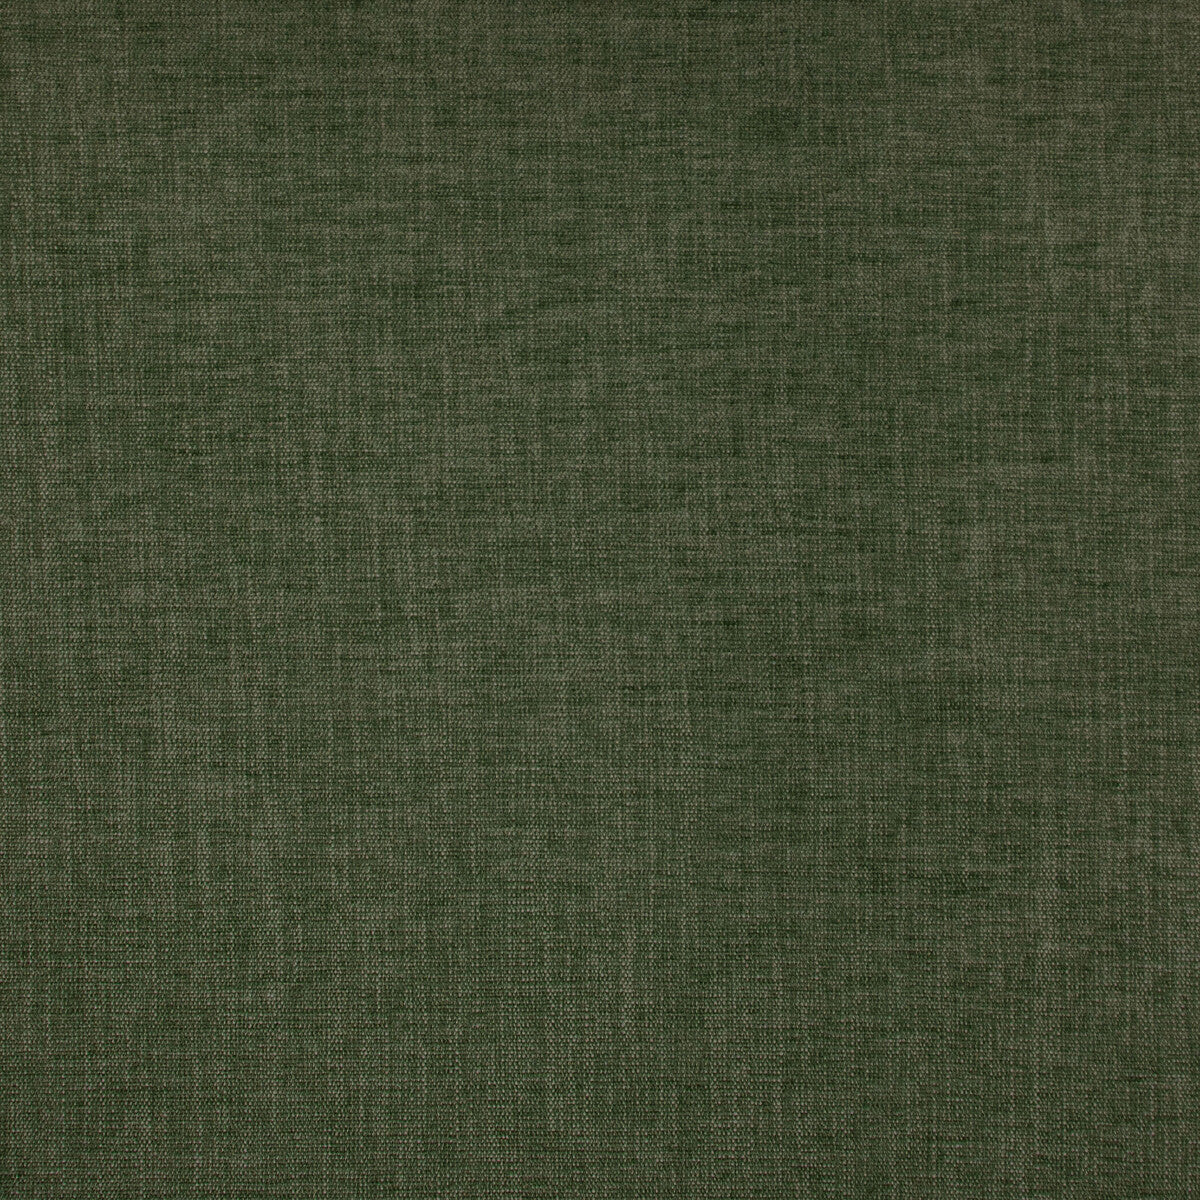 Moro fabric in verde color - pattern GDT5670.009.0 - by Gaston y Daniela in the Gaston Maiorica collection